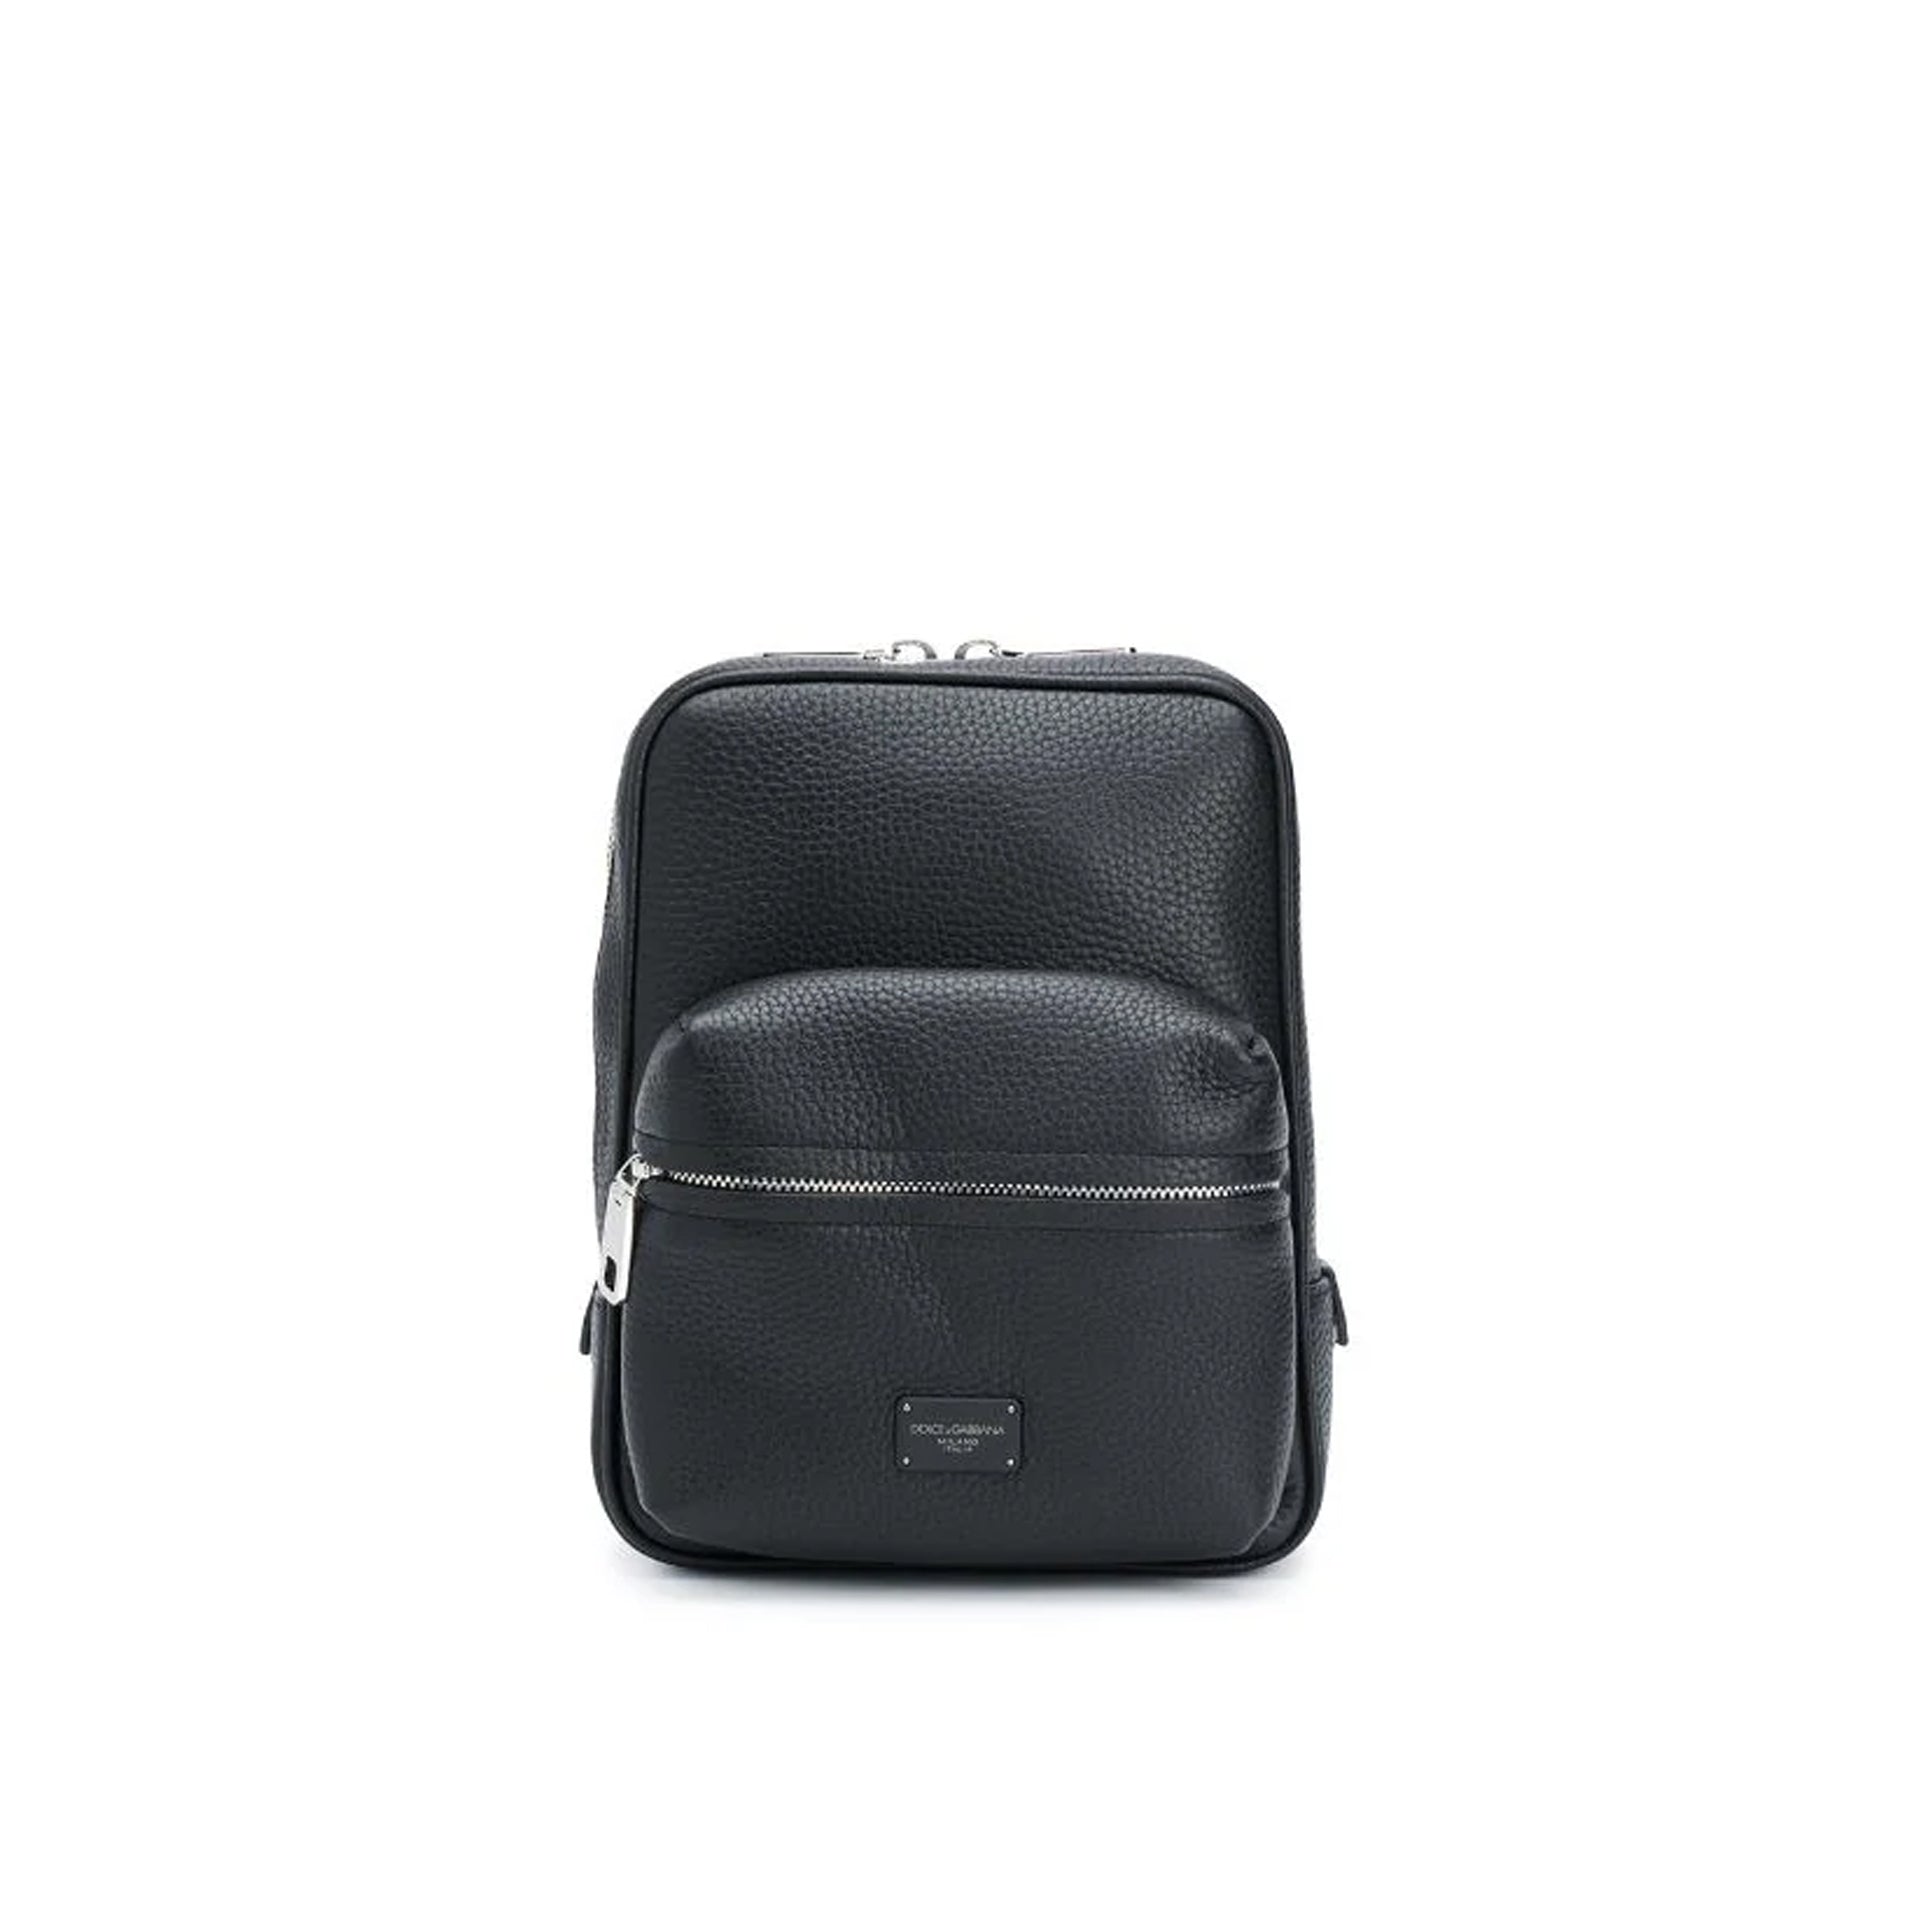 DOLCE-GABBANA-OUTLET-SALE-Dolce-Gabbana-Small-Palermo-Backpack-Taschen-BLACK-UNI-ARCHIVE-COLLECTION.jpg